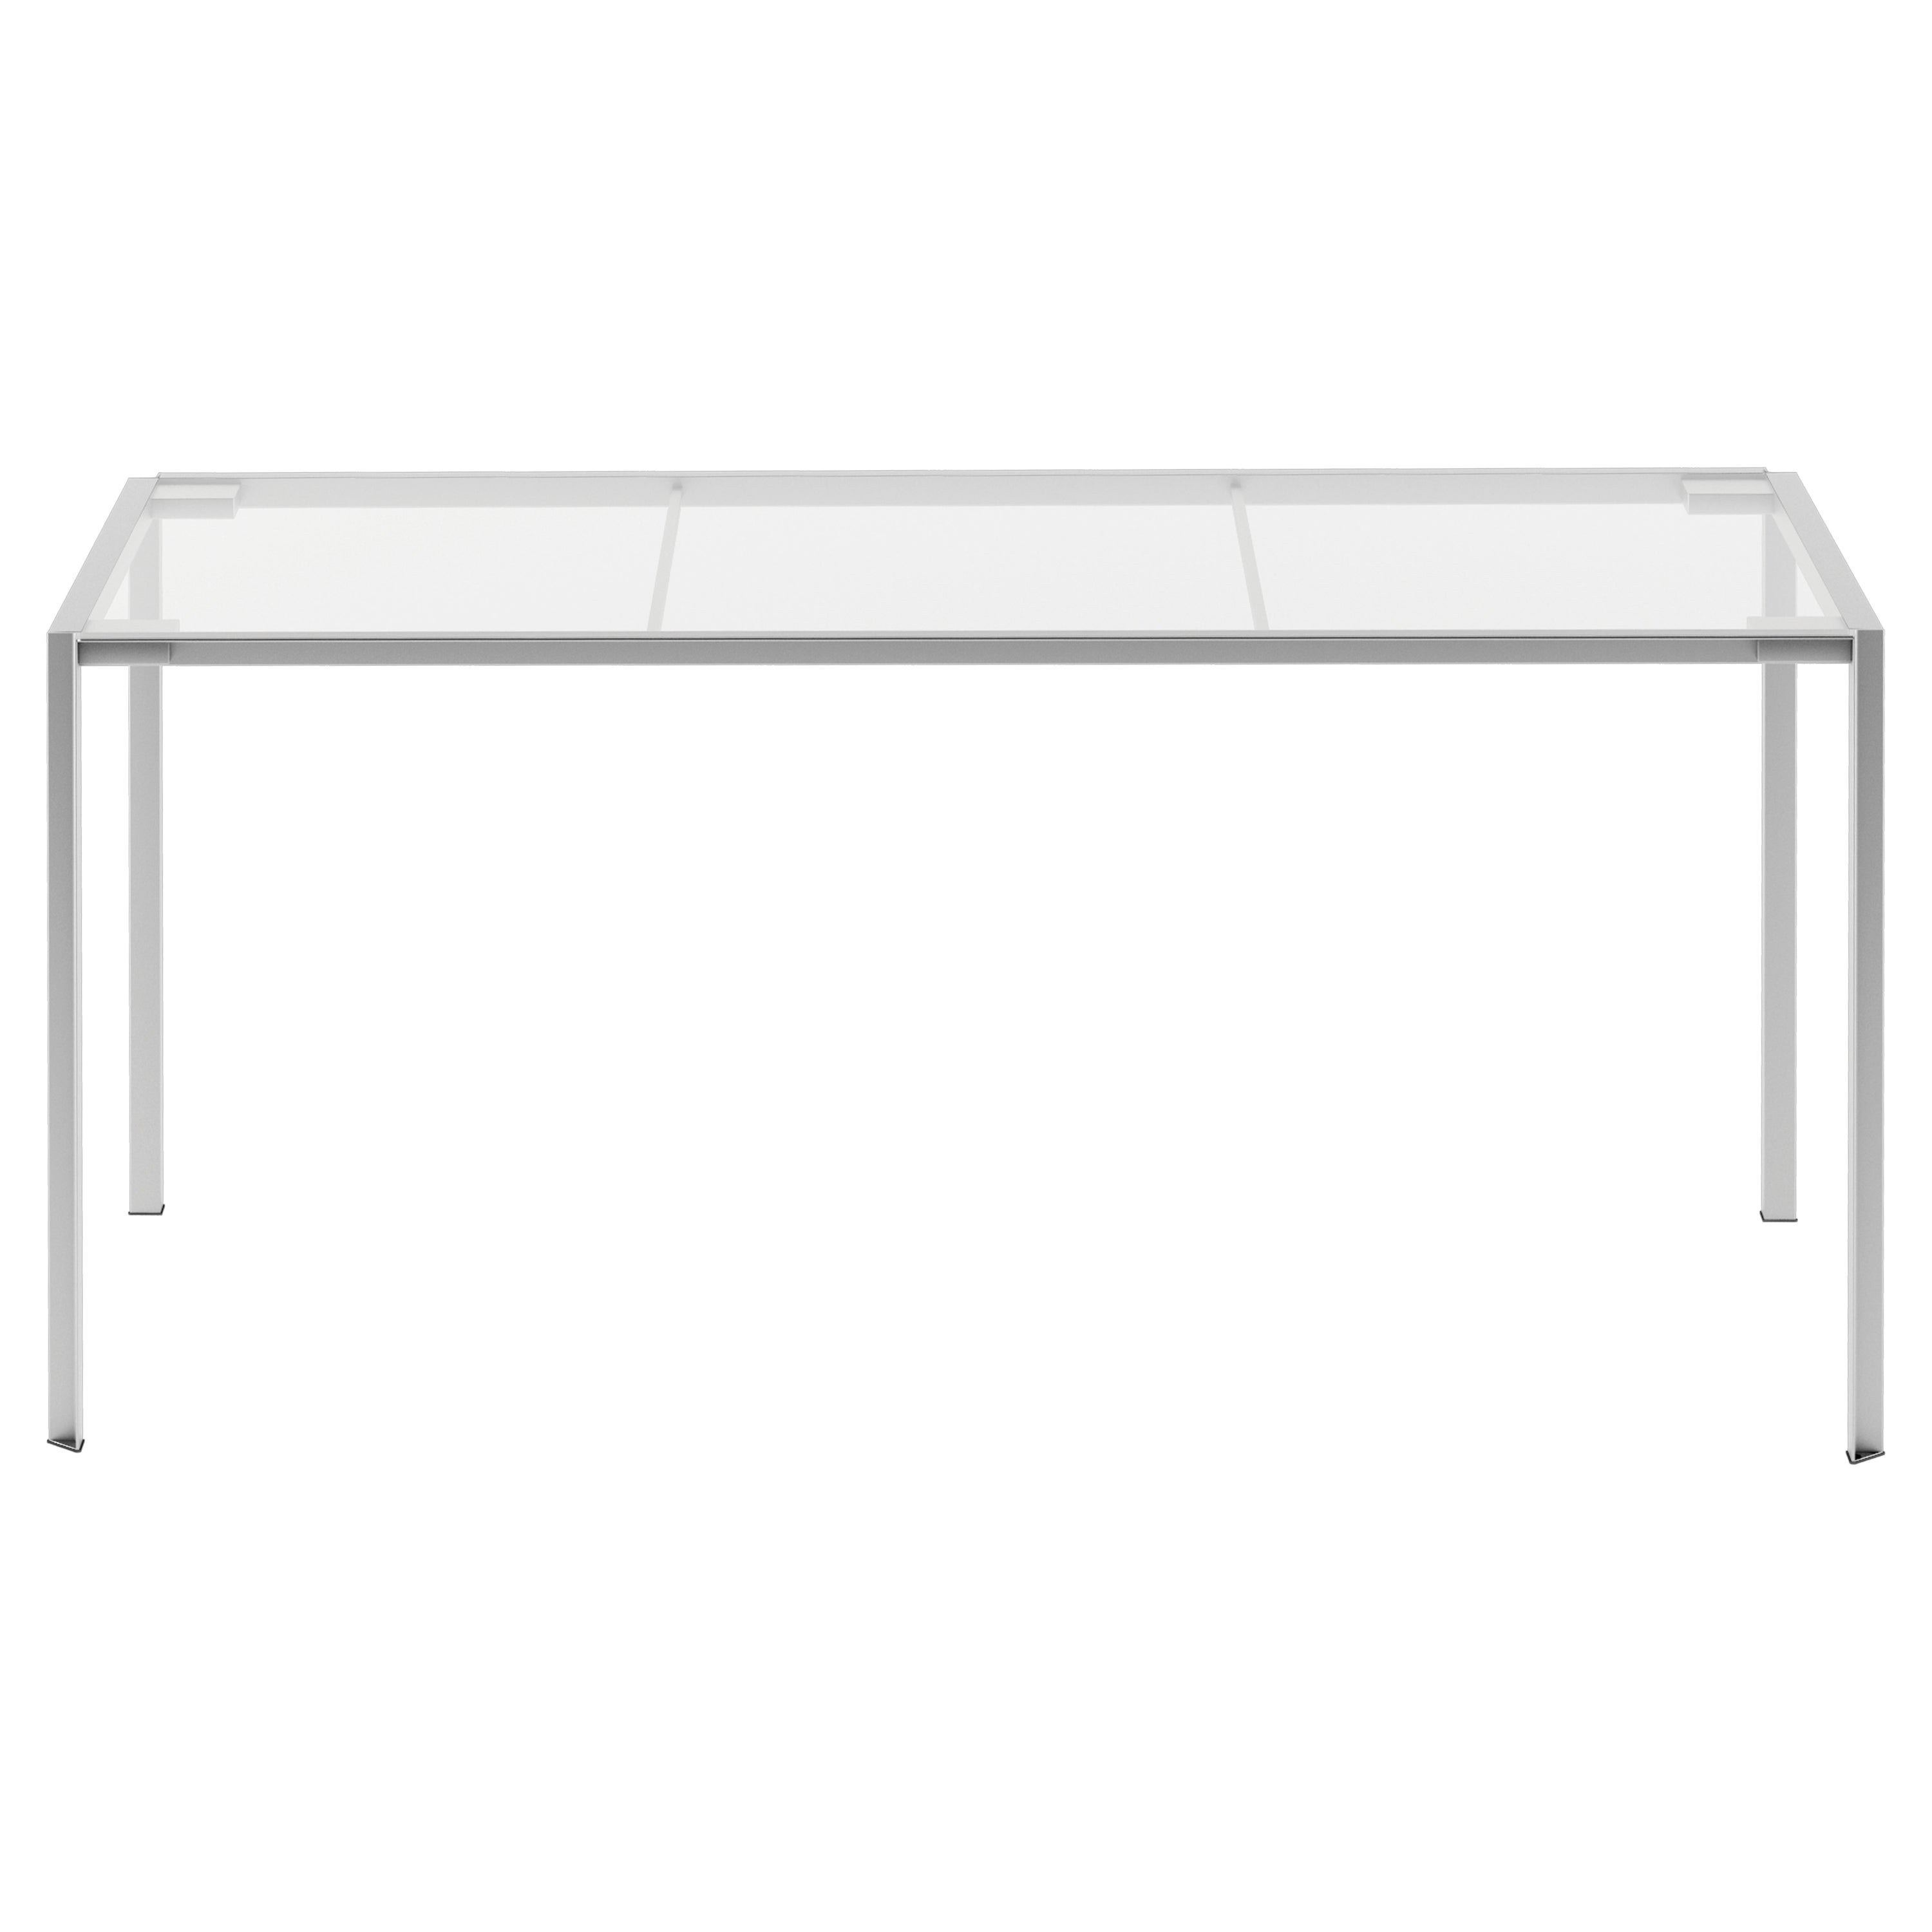 Alias 218_O Green Table with Brushed Stainless Steel Frame and Glass Top